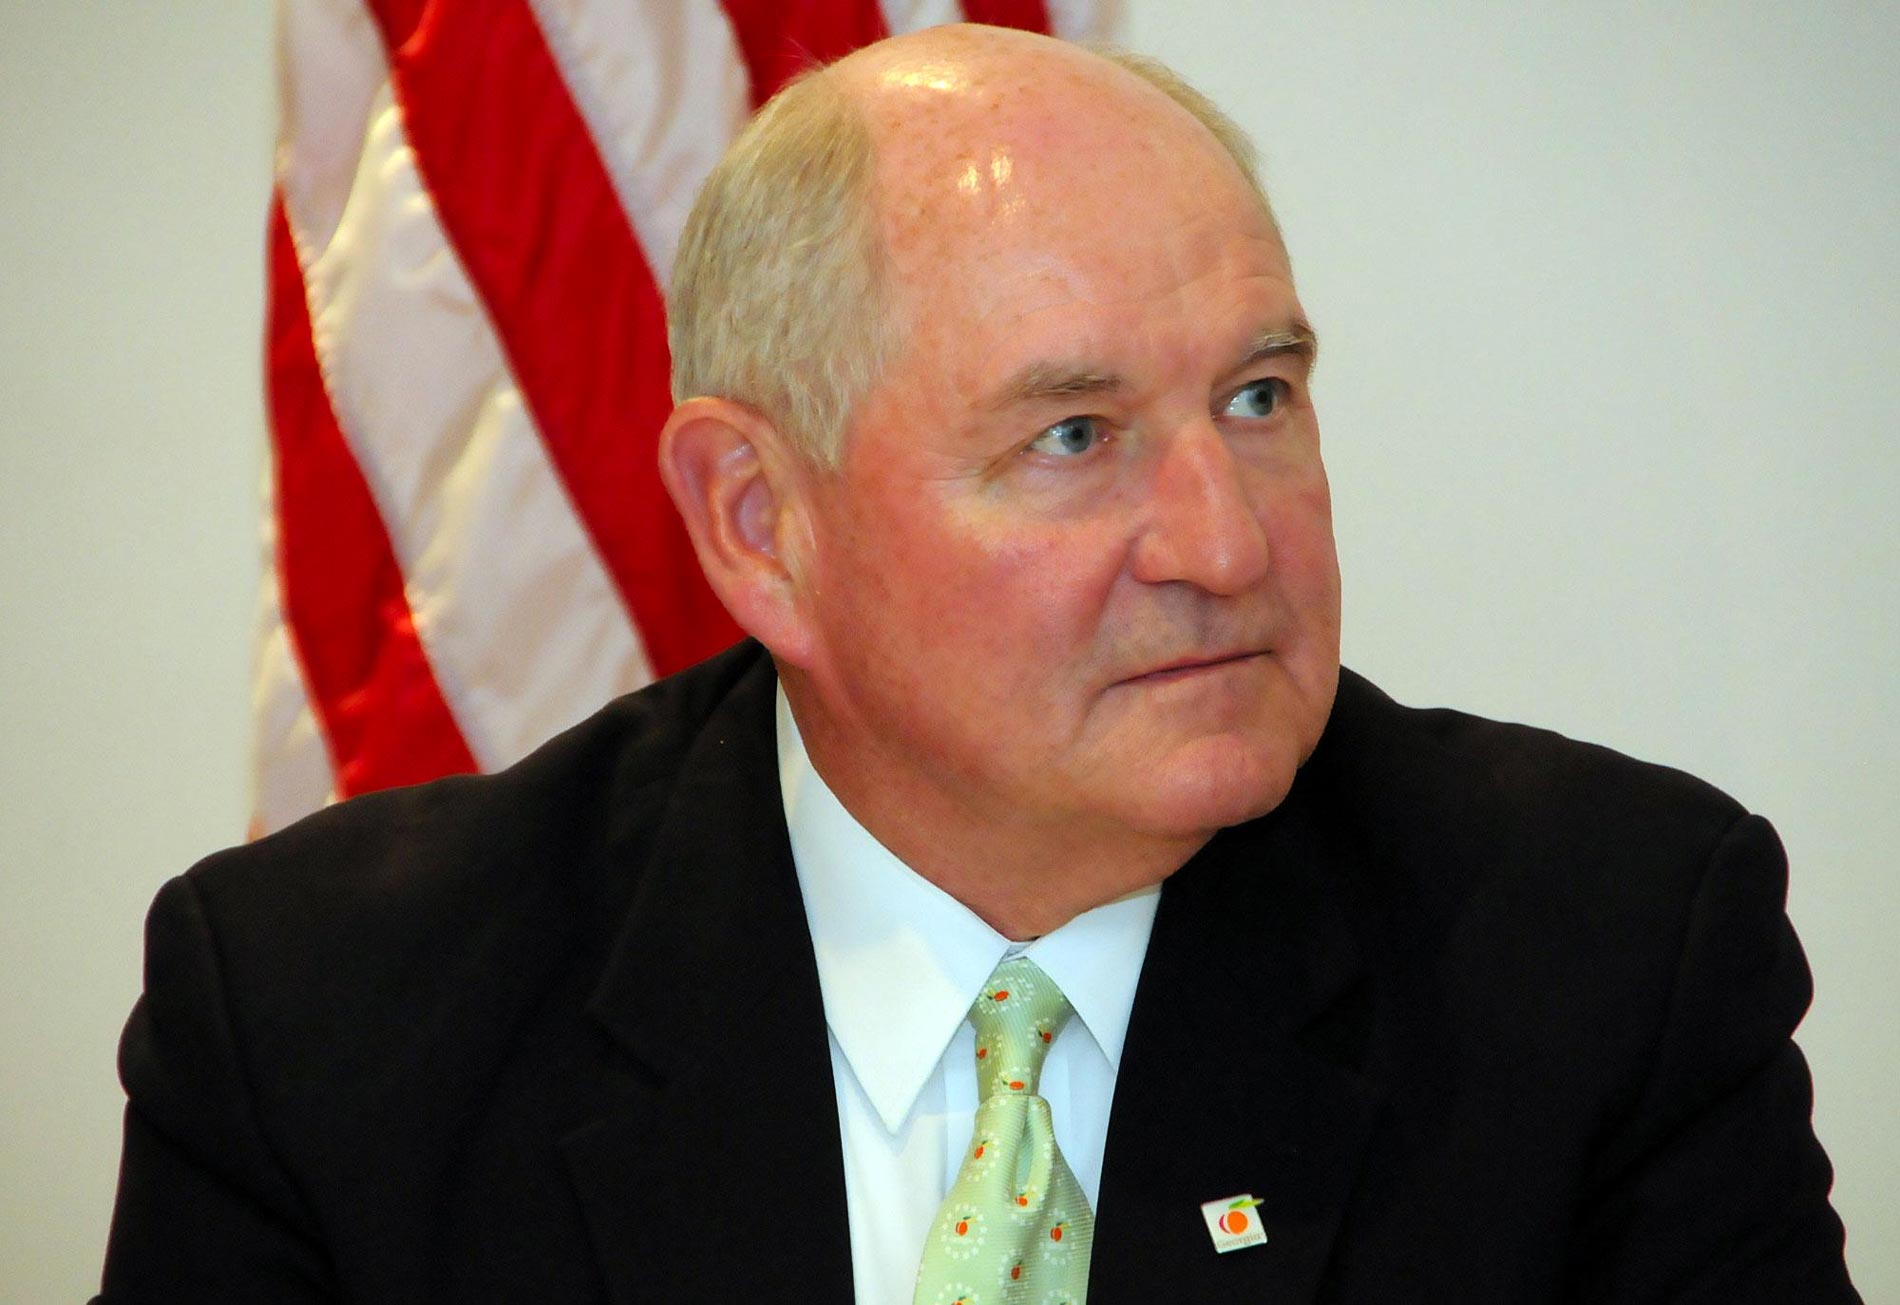 Perdue: Let’s Stop Calling the Forest Service “the Forest Service”